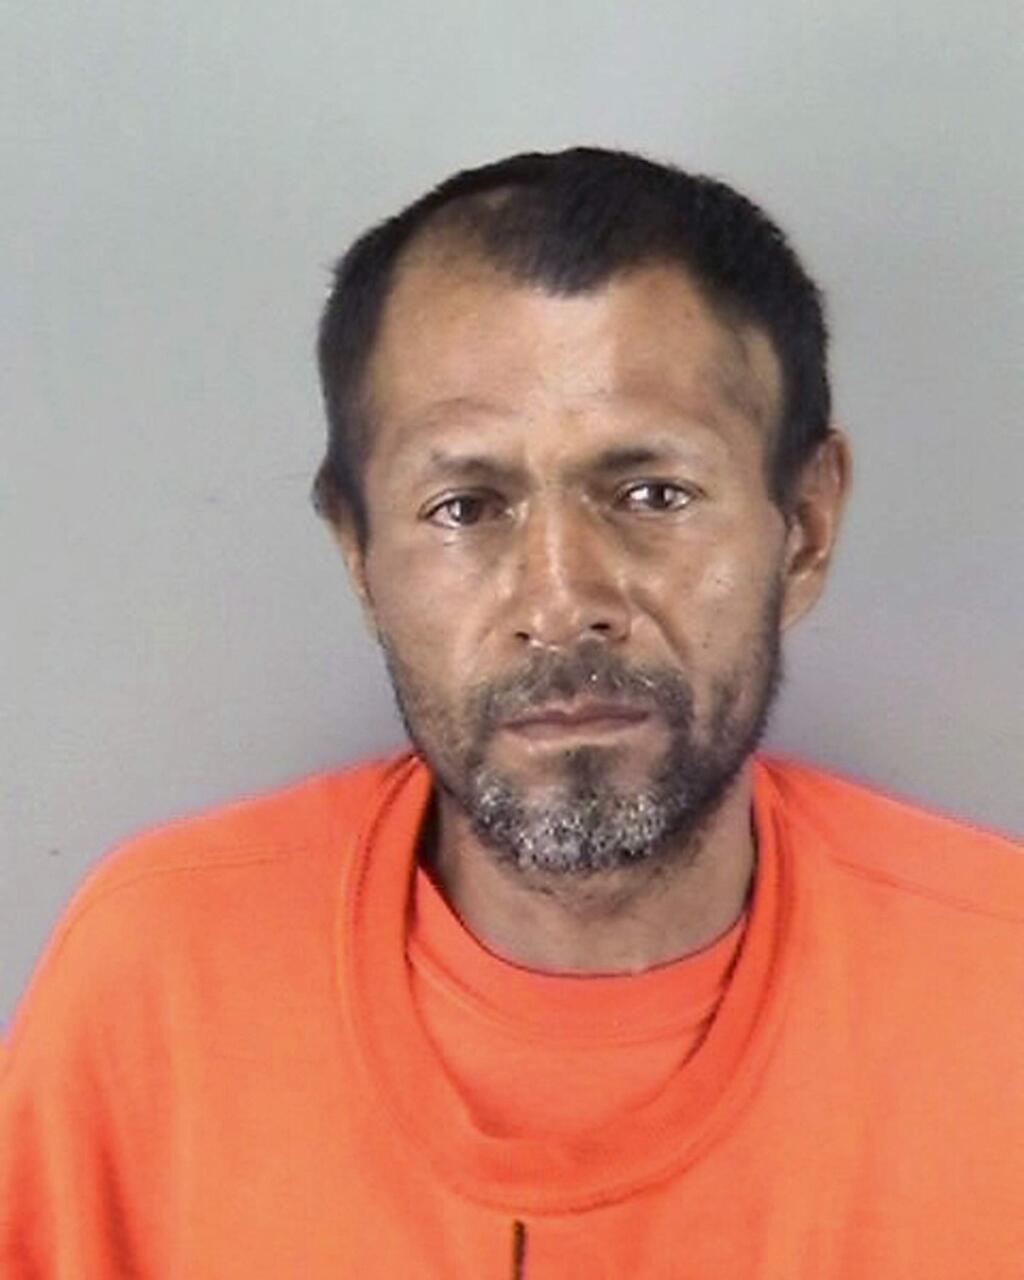 FILE - This undated file booking photo provided by the San Francisco Police Department shows Jose Ines Garcia Zarate, a homeless undocumented immigrant acquitted of killing Kate Steinle on a San Francisco pier. The Mexican man acquitted of murder in a San Francisco case that prompted immigration debate has pleaded not guilty to federal gun charges. (San Francisco Police Department via AP, File)